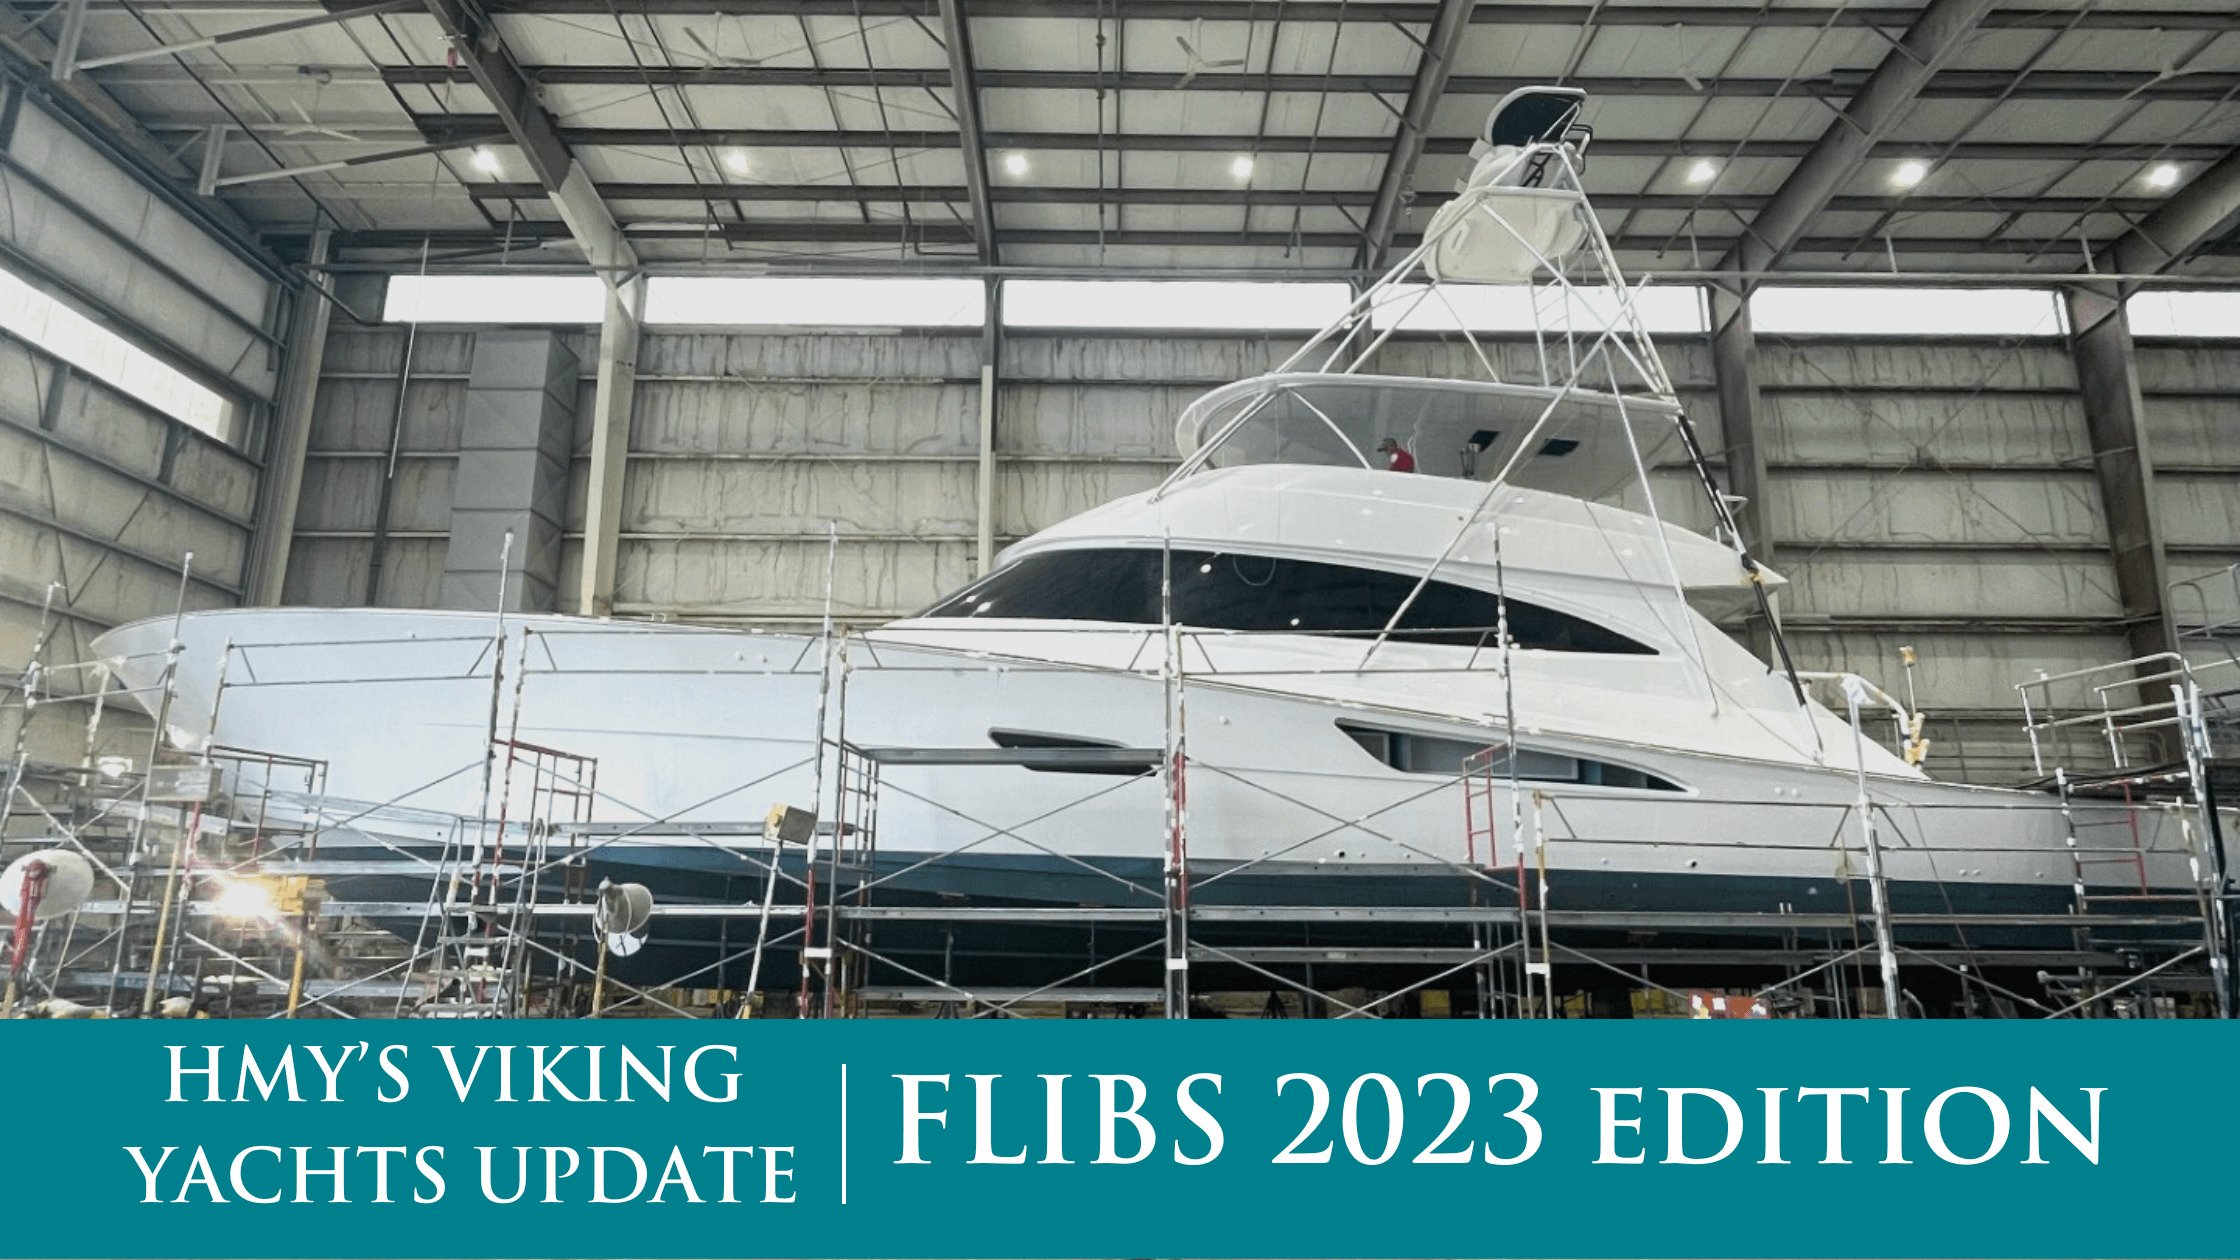 HMY’s Viking Yachts Update: FLIBS 2023 Edition